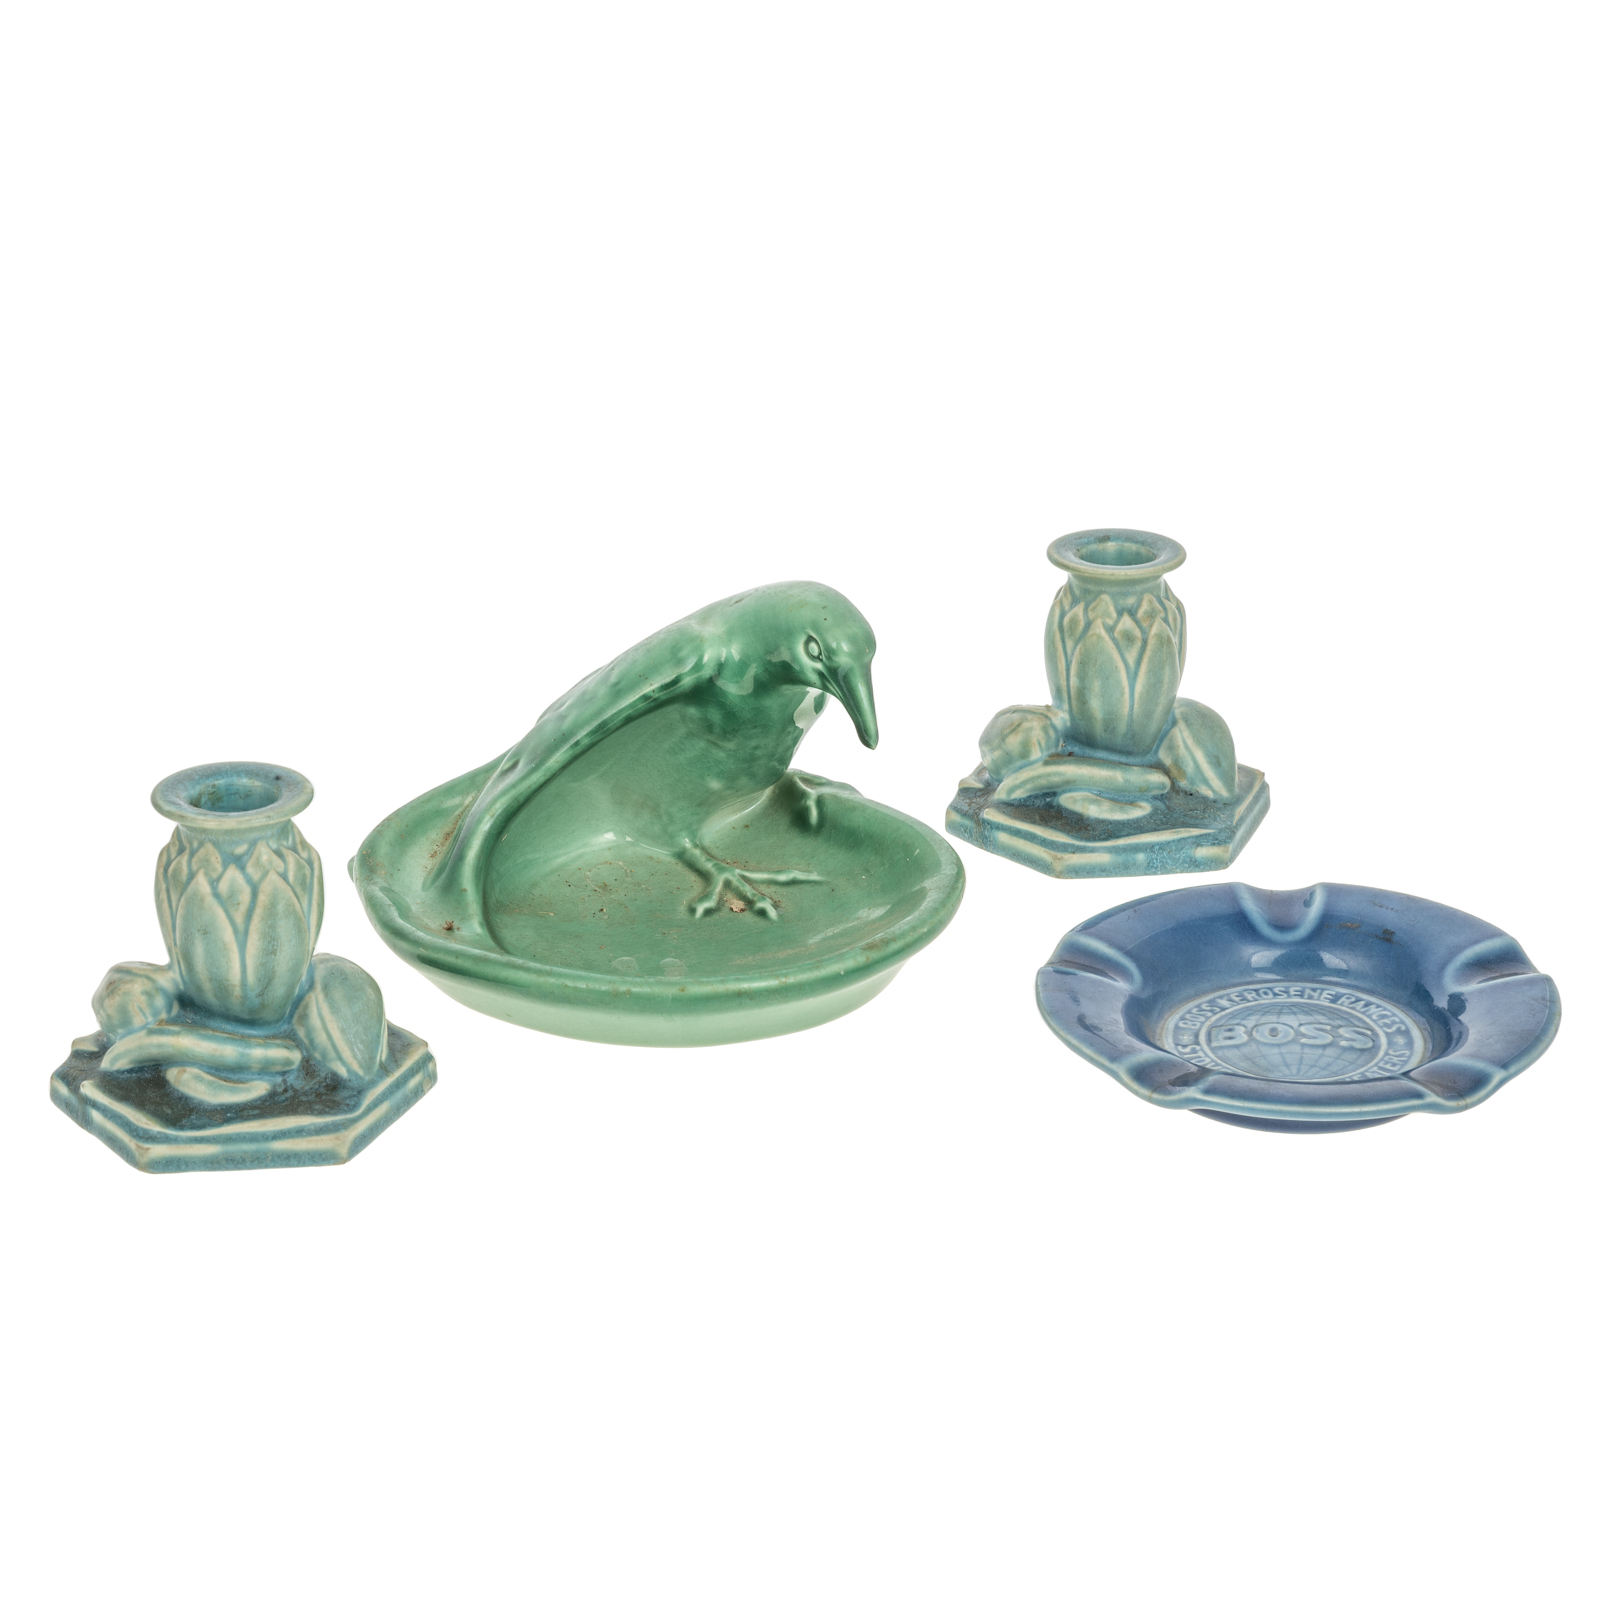 FOUR ROOKWOOD POTTERY ITEMS Includes 36968d